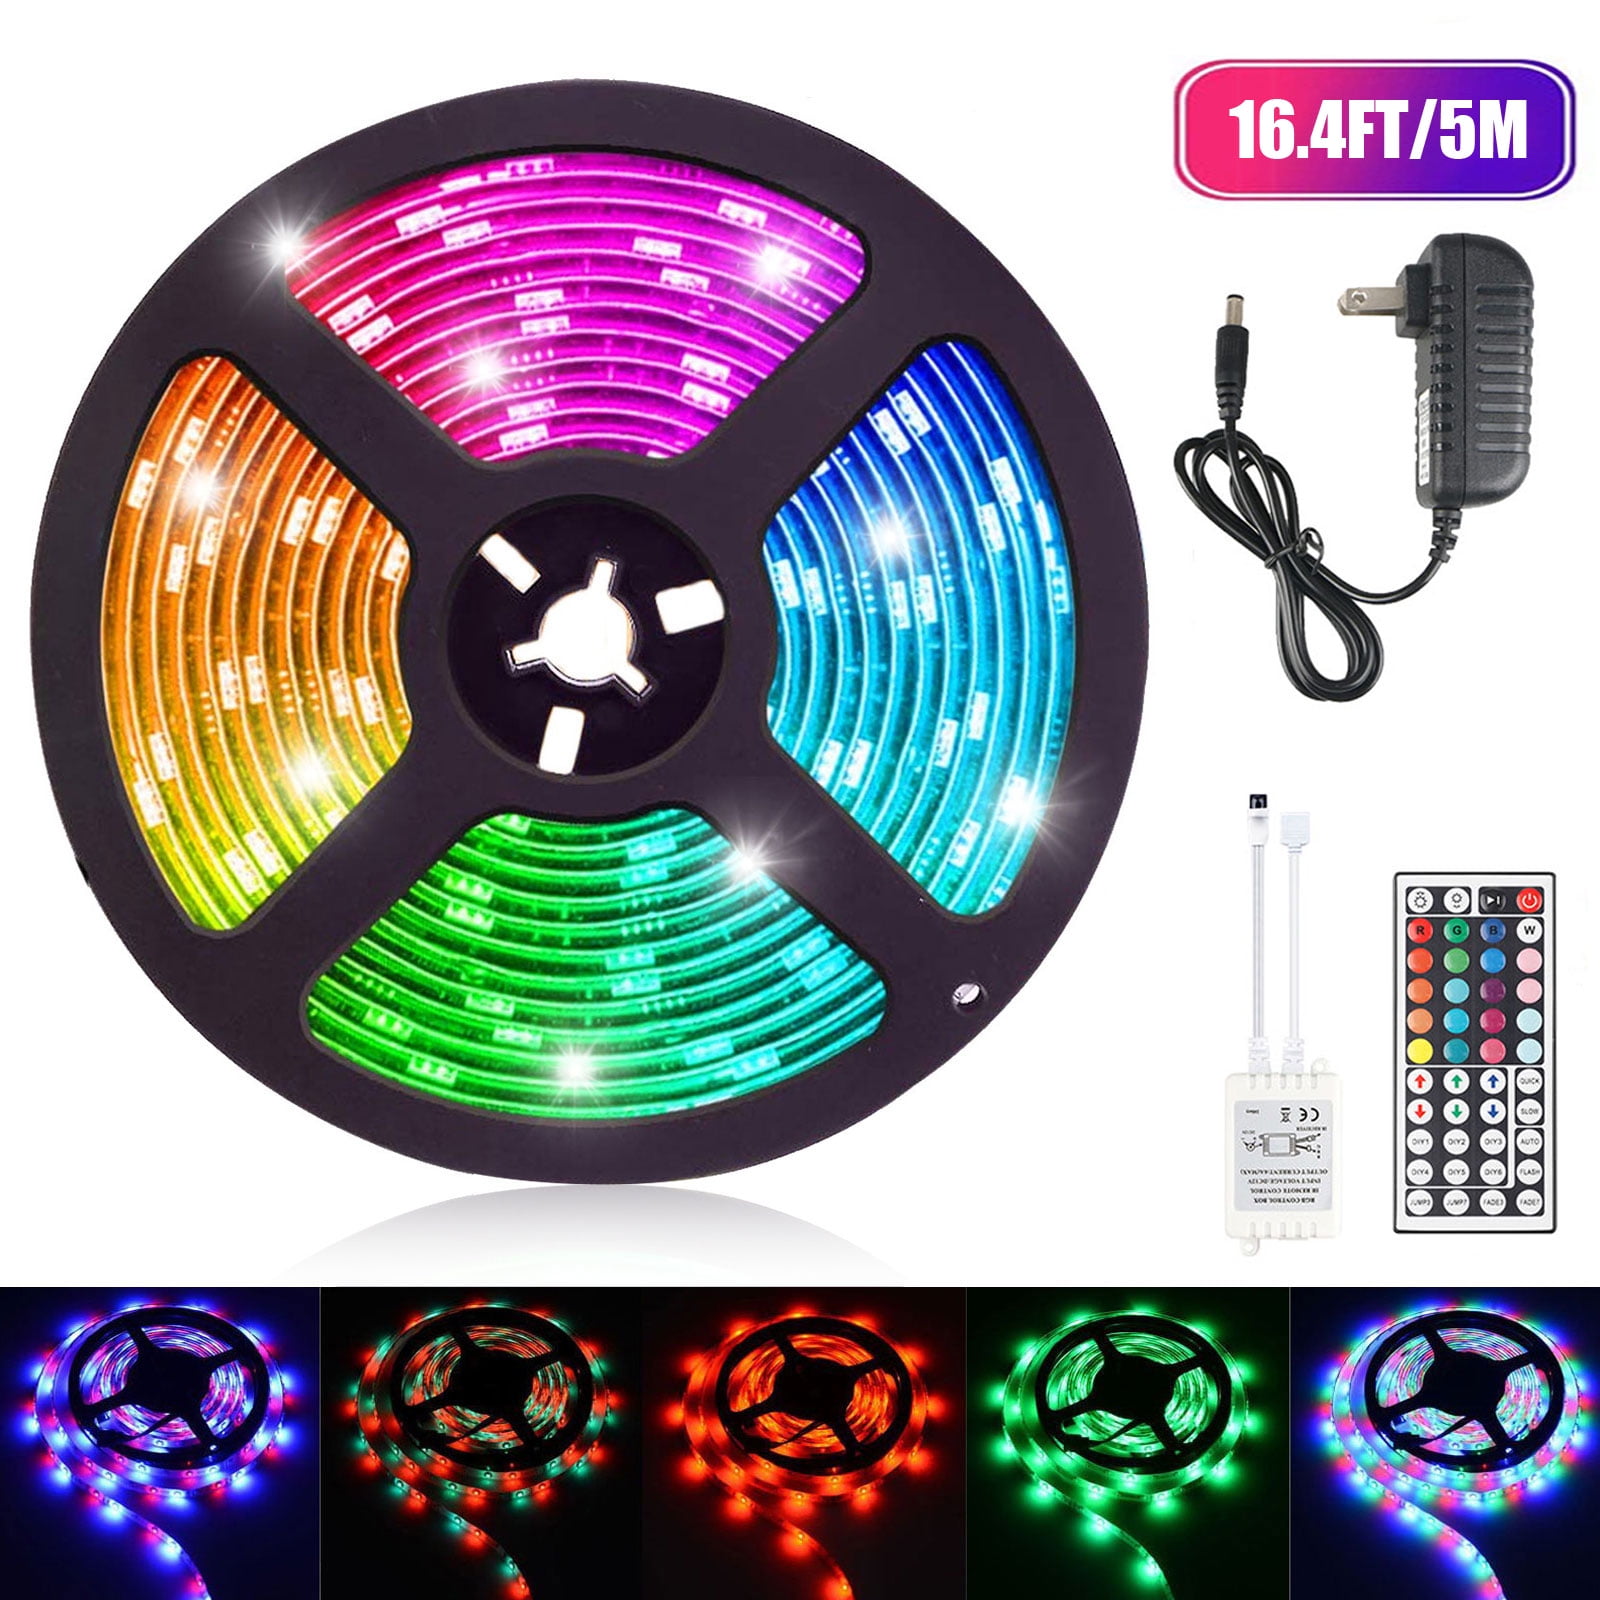 Details about   5M RGB 3528 300 Led SMD Flexible Light Strip Lamp+44 key IR Remote Controller 